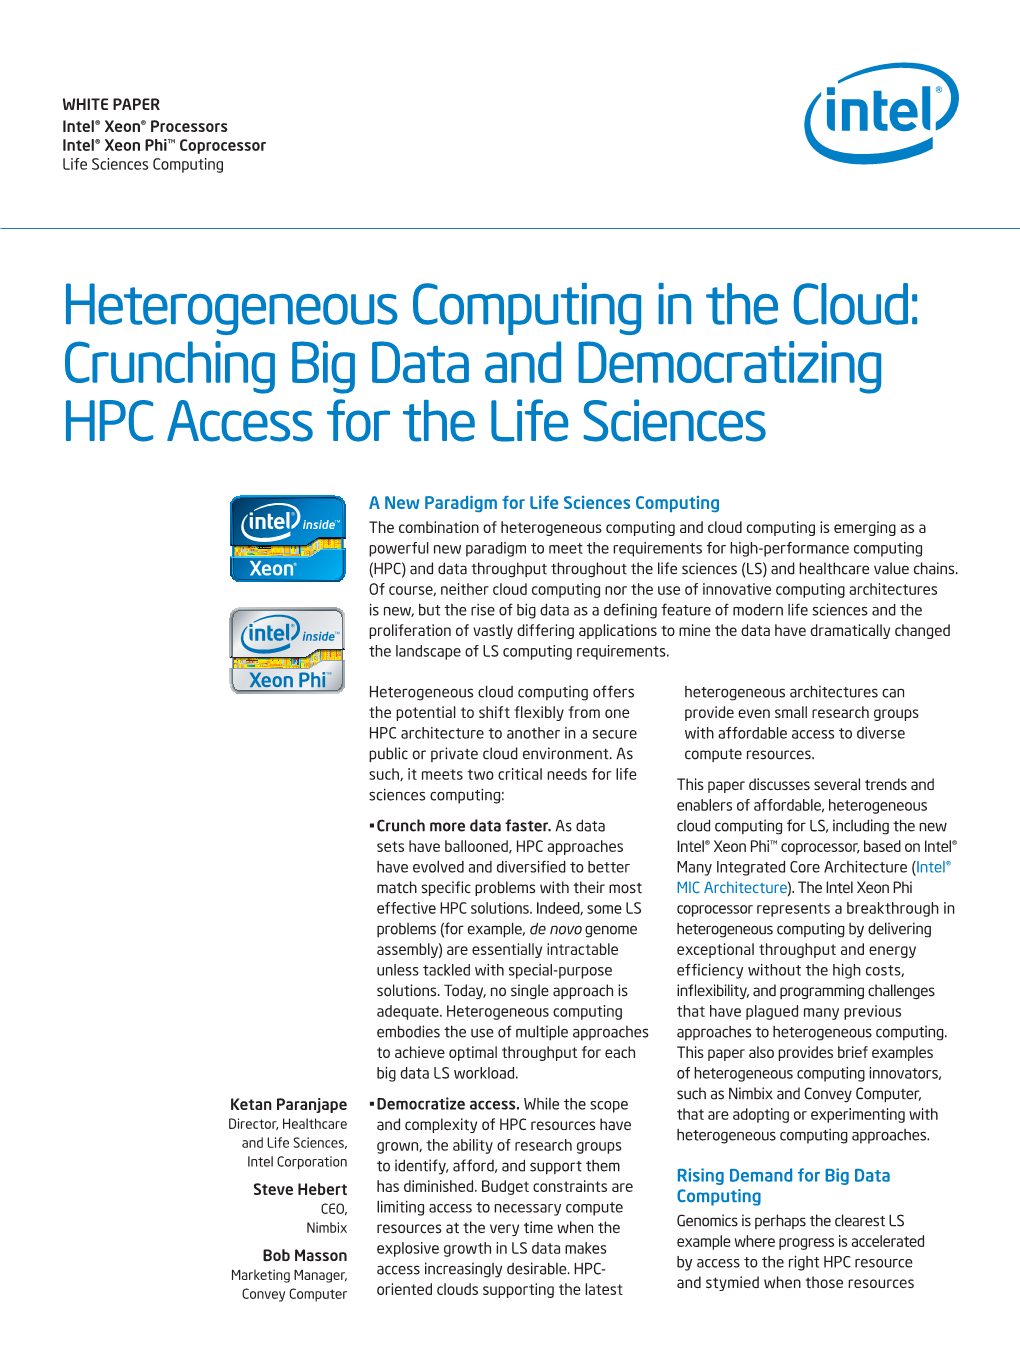 Heterogeneous Computing in the Cloud: Crunching Big Data and Democratizing HPC Access for the Life Sciences